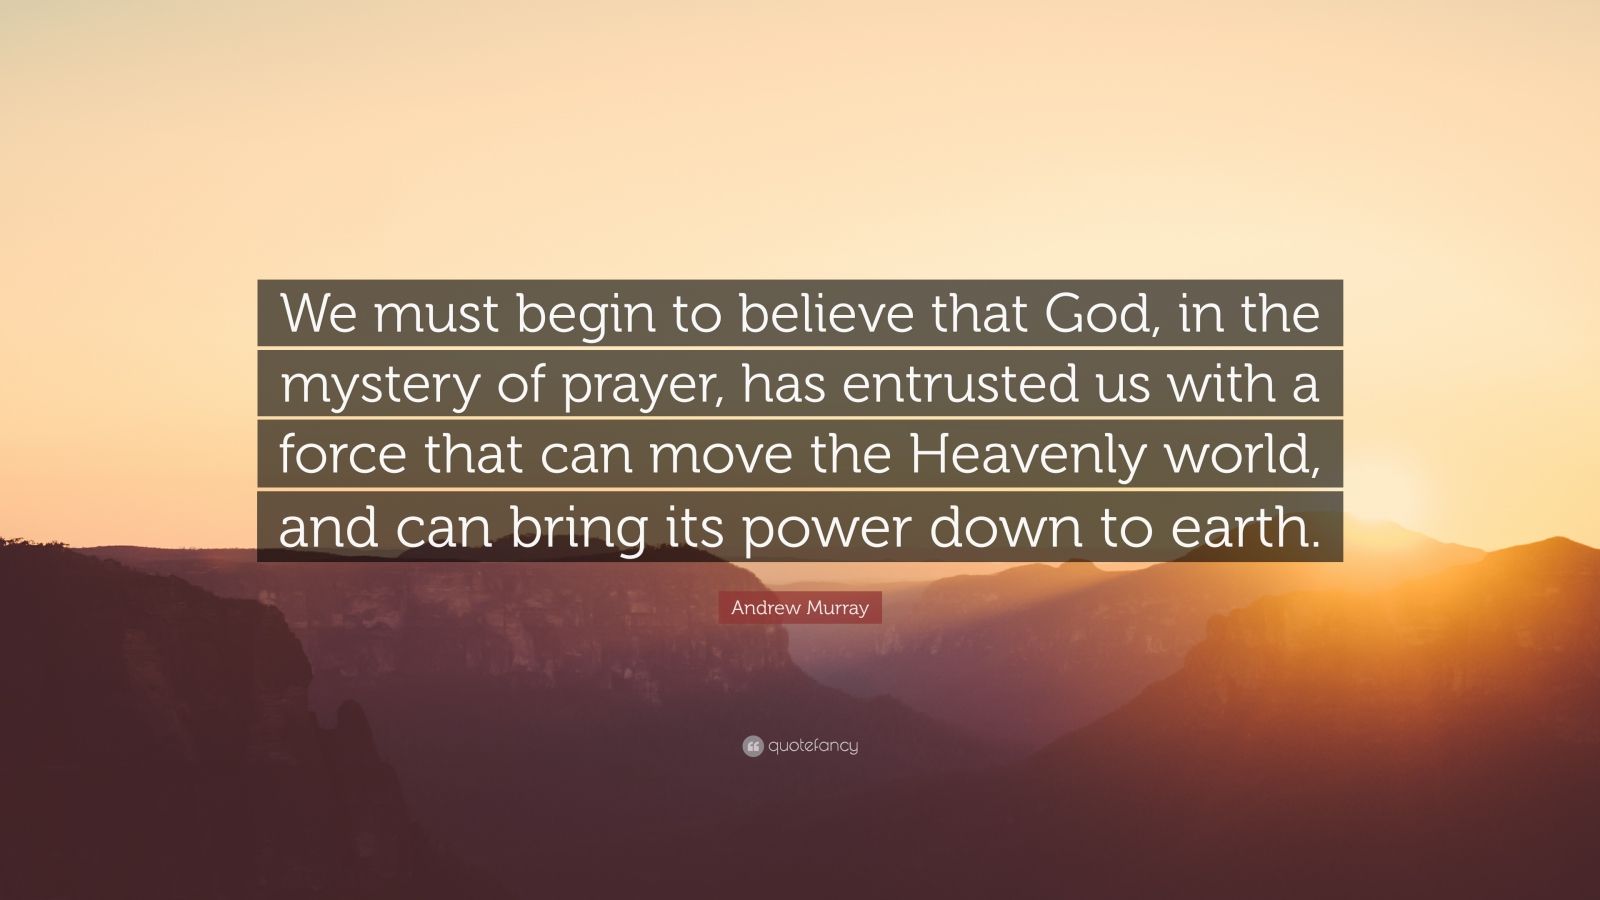 Andrew Murray Quote: “We must begin to believe that God, in the mystery ...